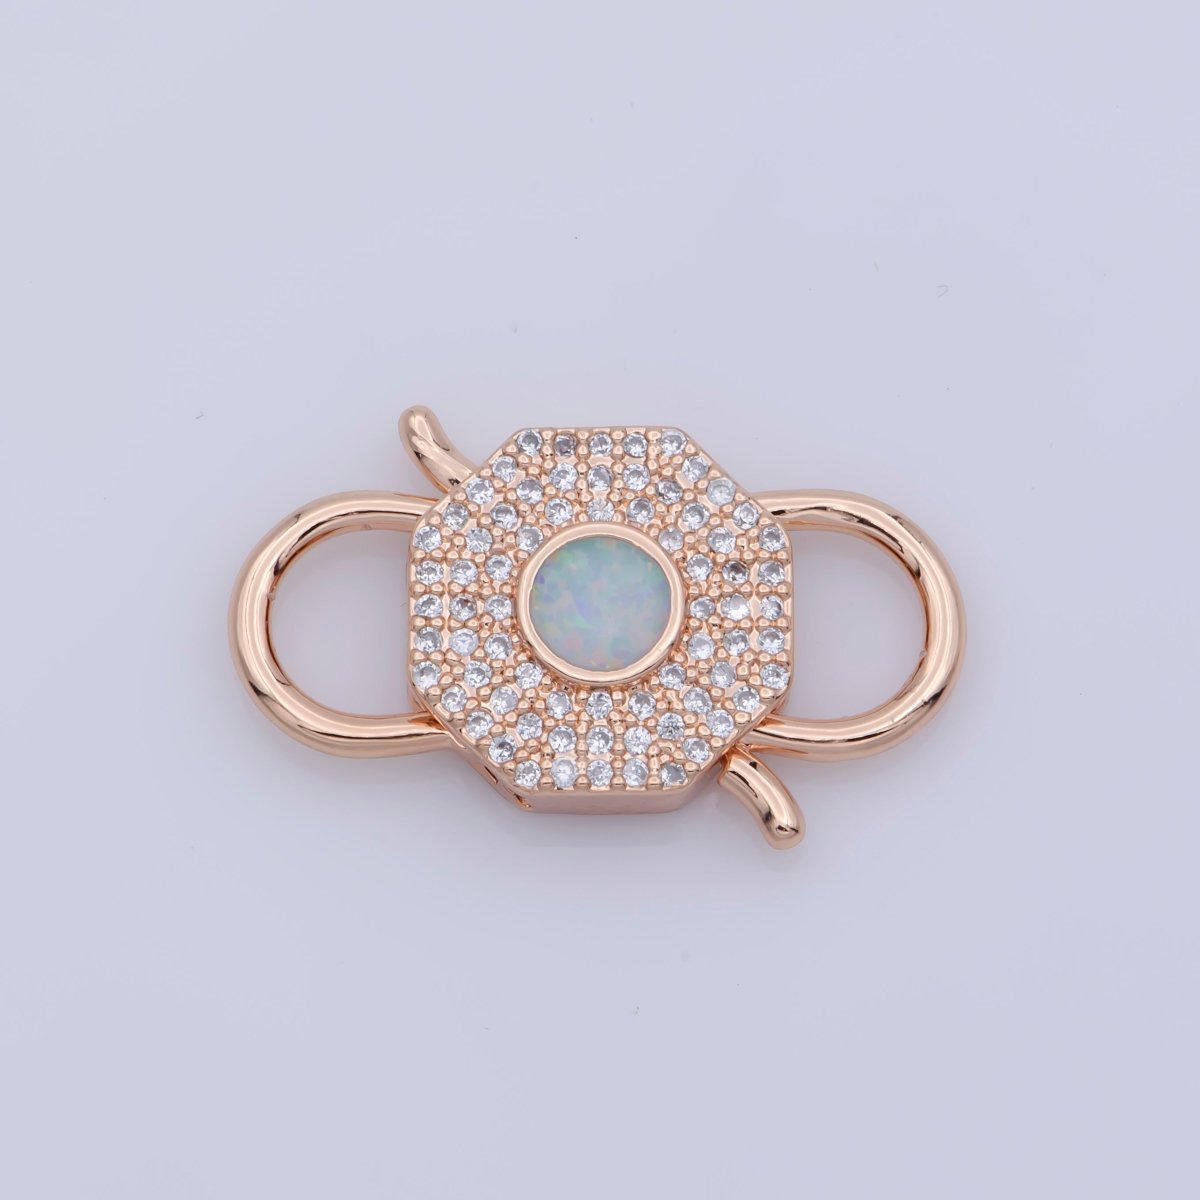 Opal Clasp Buckle Silver, Rose Gold, Black Interlock Micro pave Clasp Cubic Interlocking Clasp Fastener for Bracelet Necklace Jewelry Supply F-327 - DLUXCA